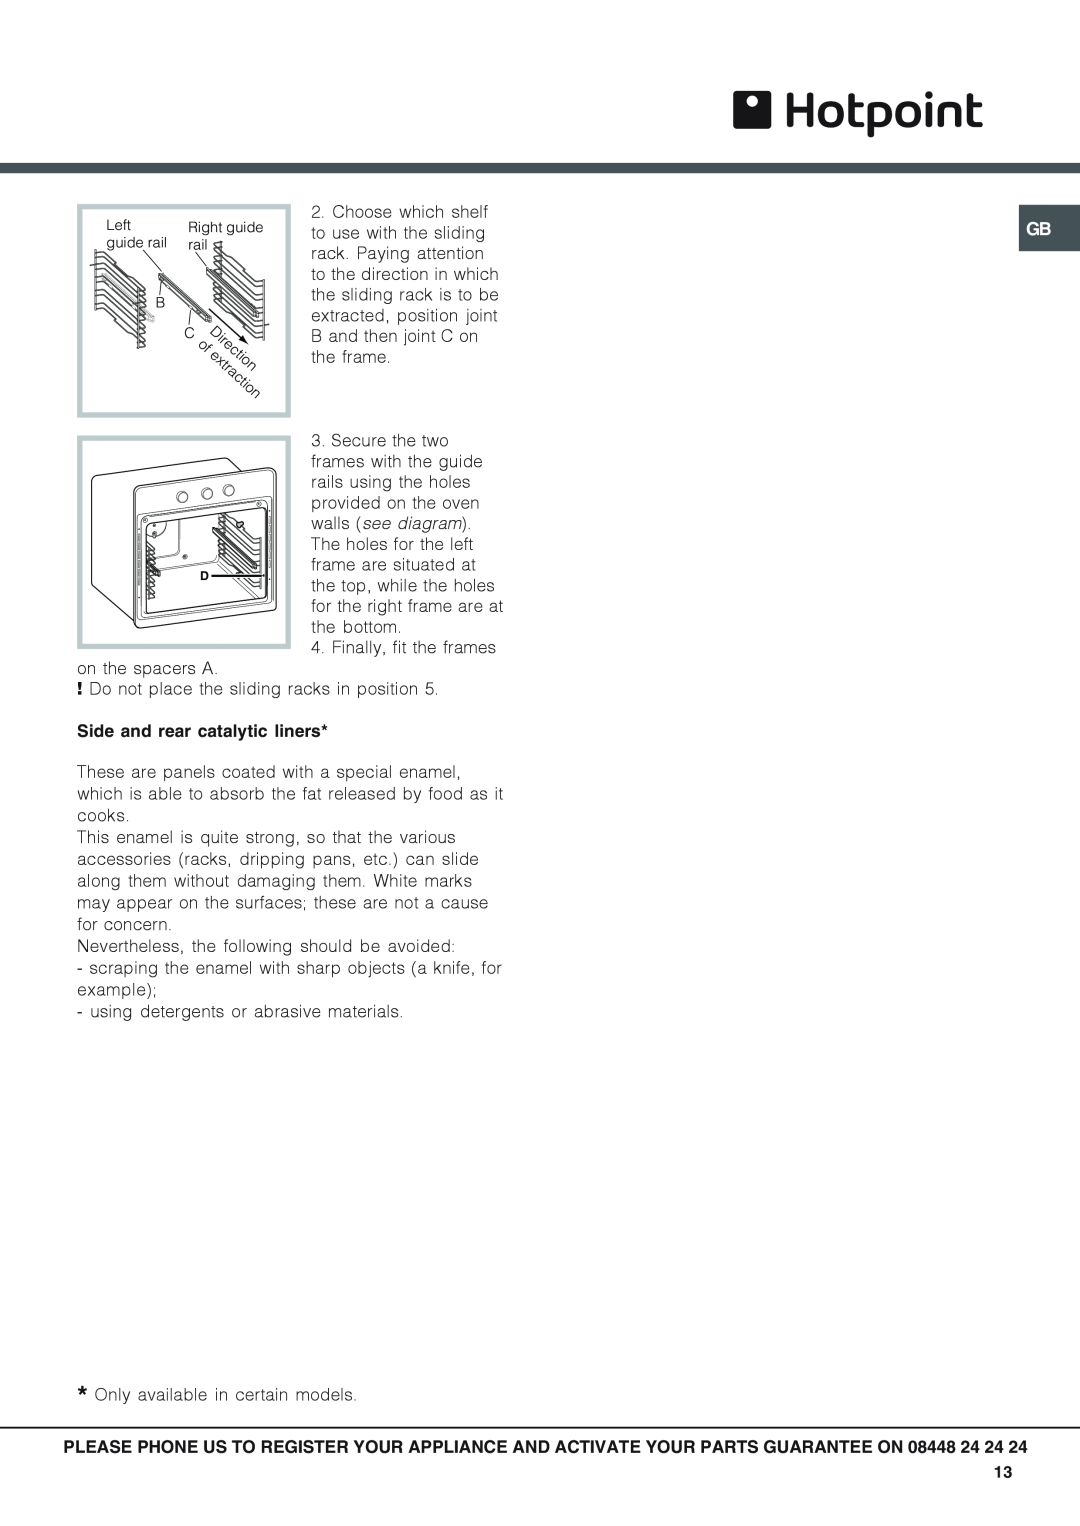 Hotpoint SX 1038L CX, SX 1038N CX operating instructions Side and rear catalytic liners 